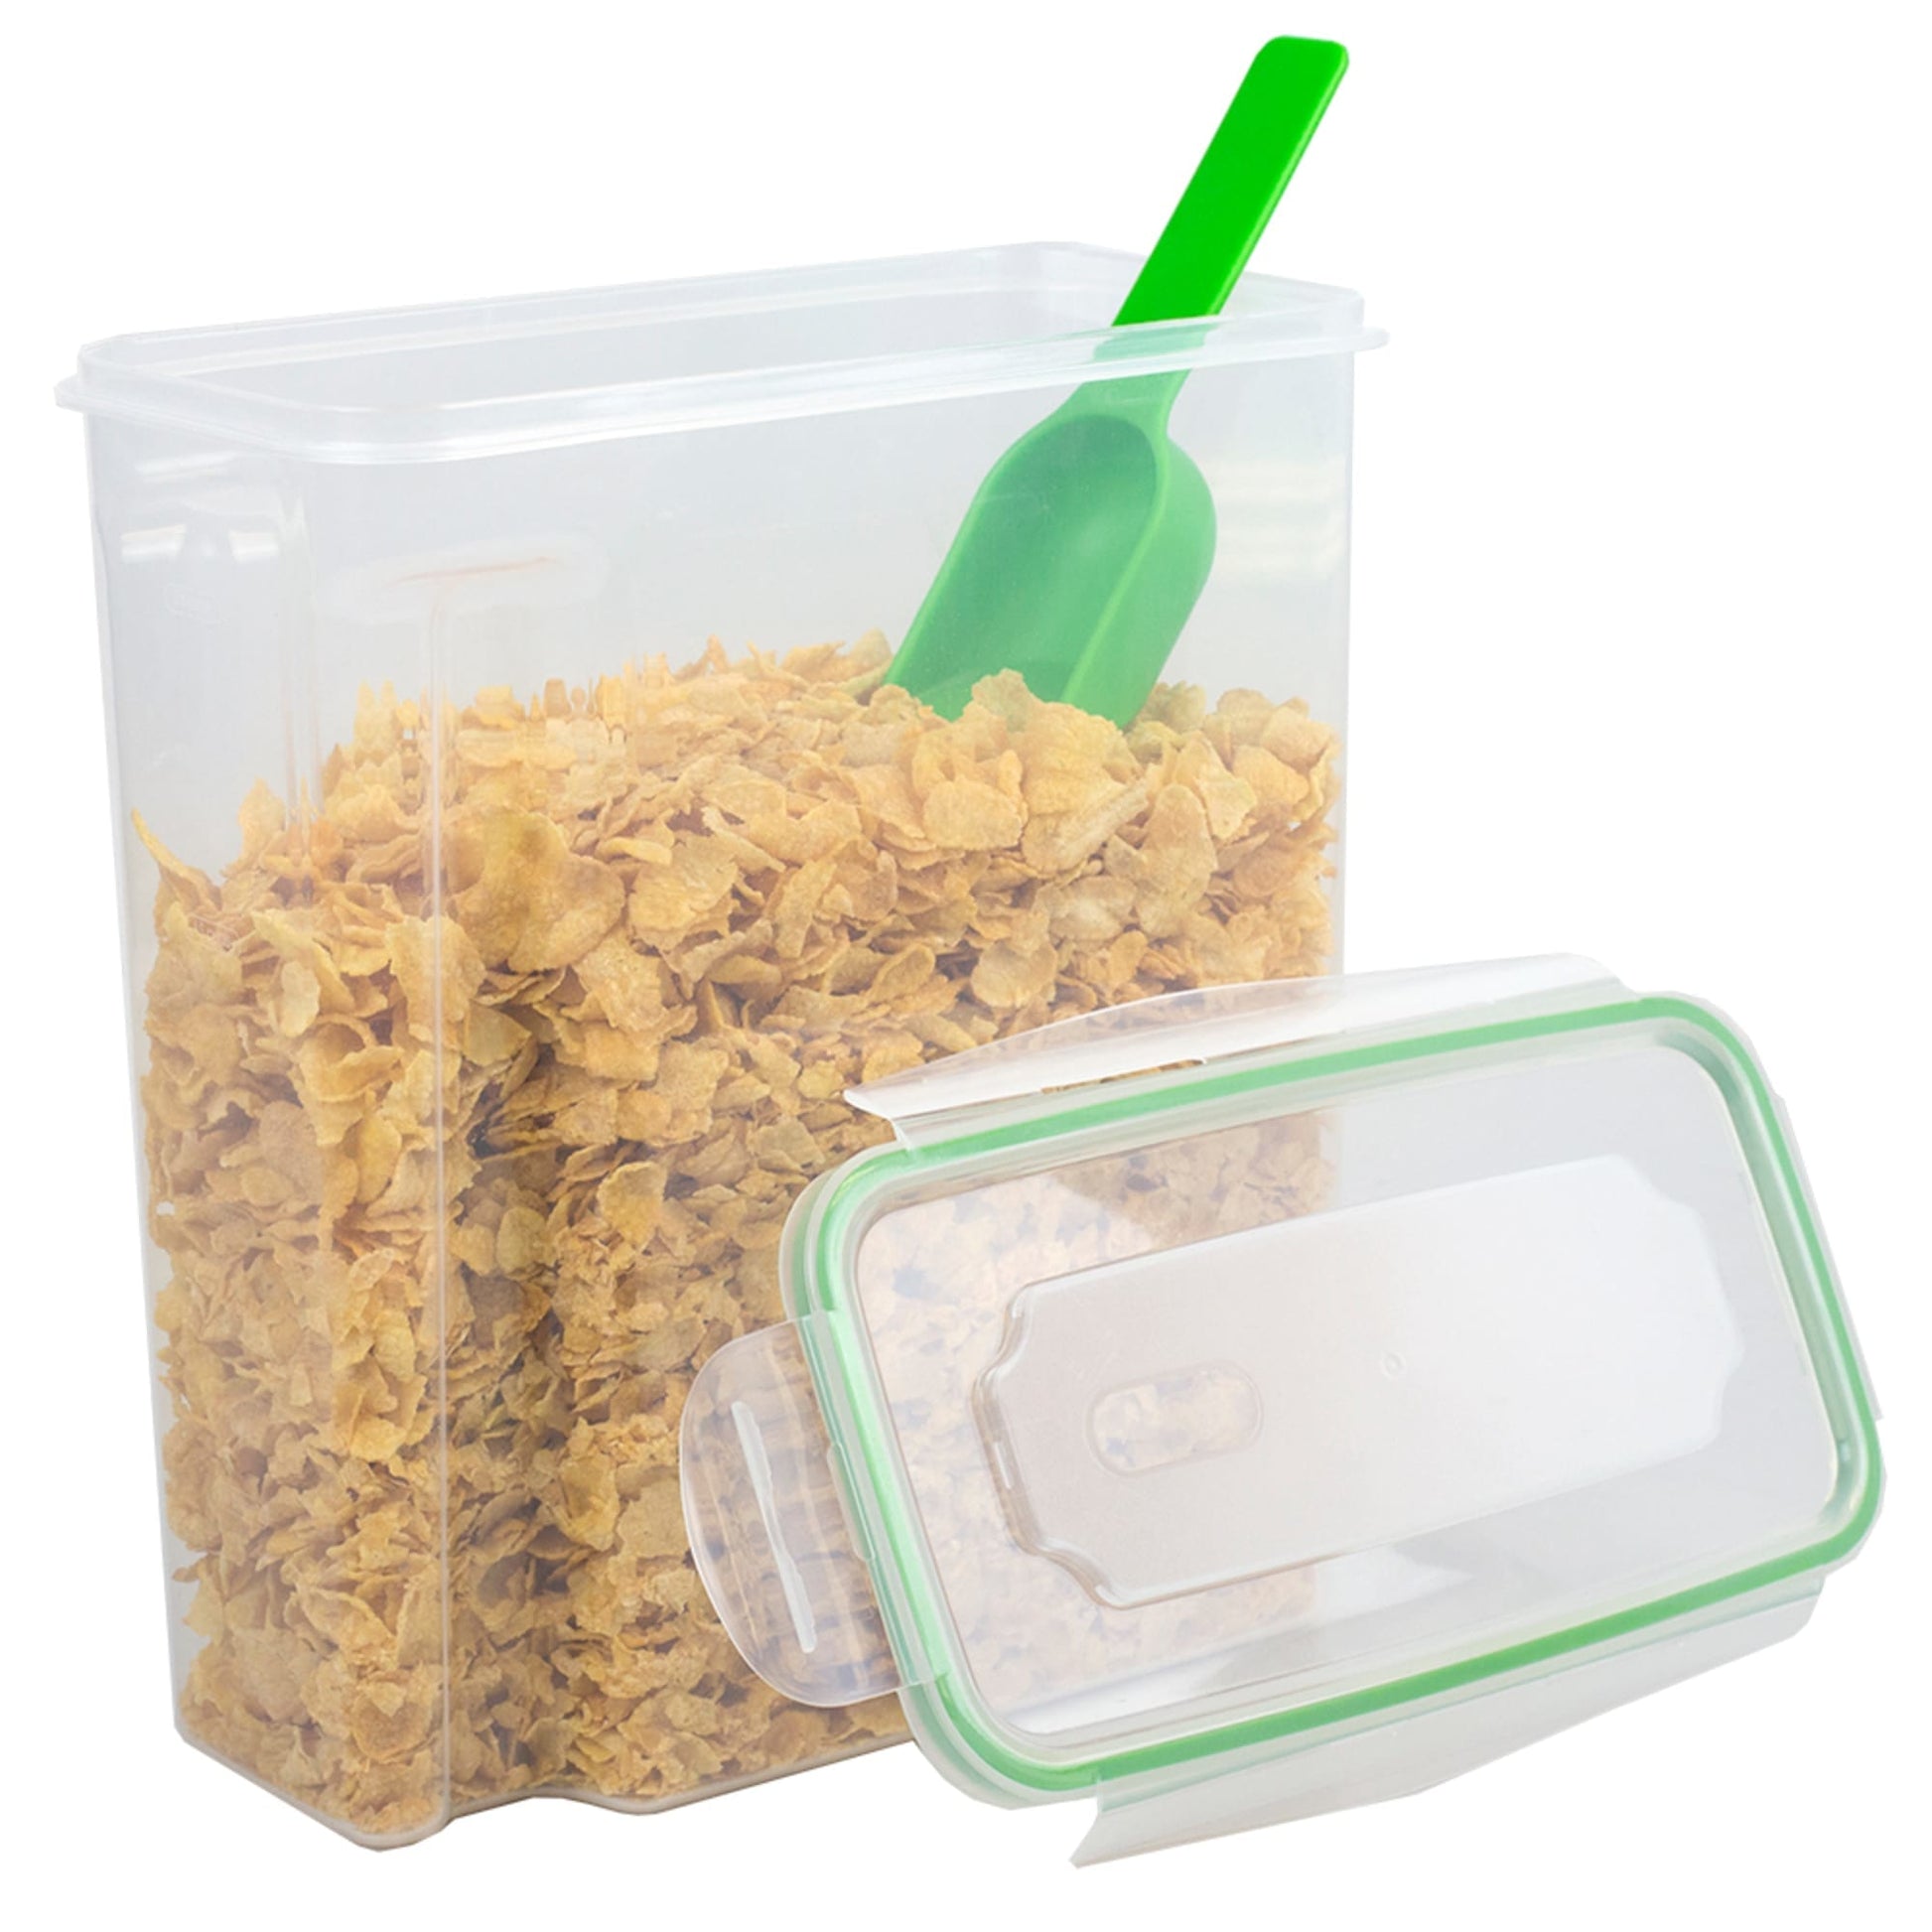 Home Basics Plastic 3-Piece Cereal Container Set with Lids, White